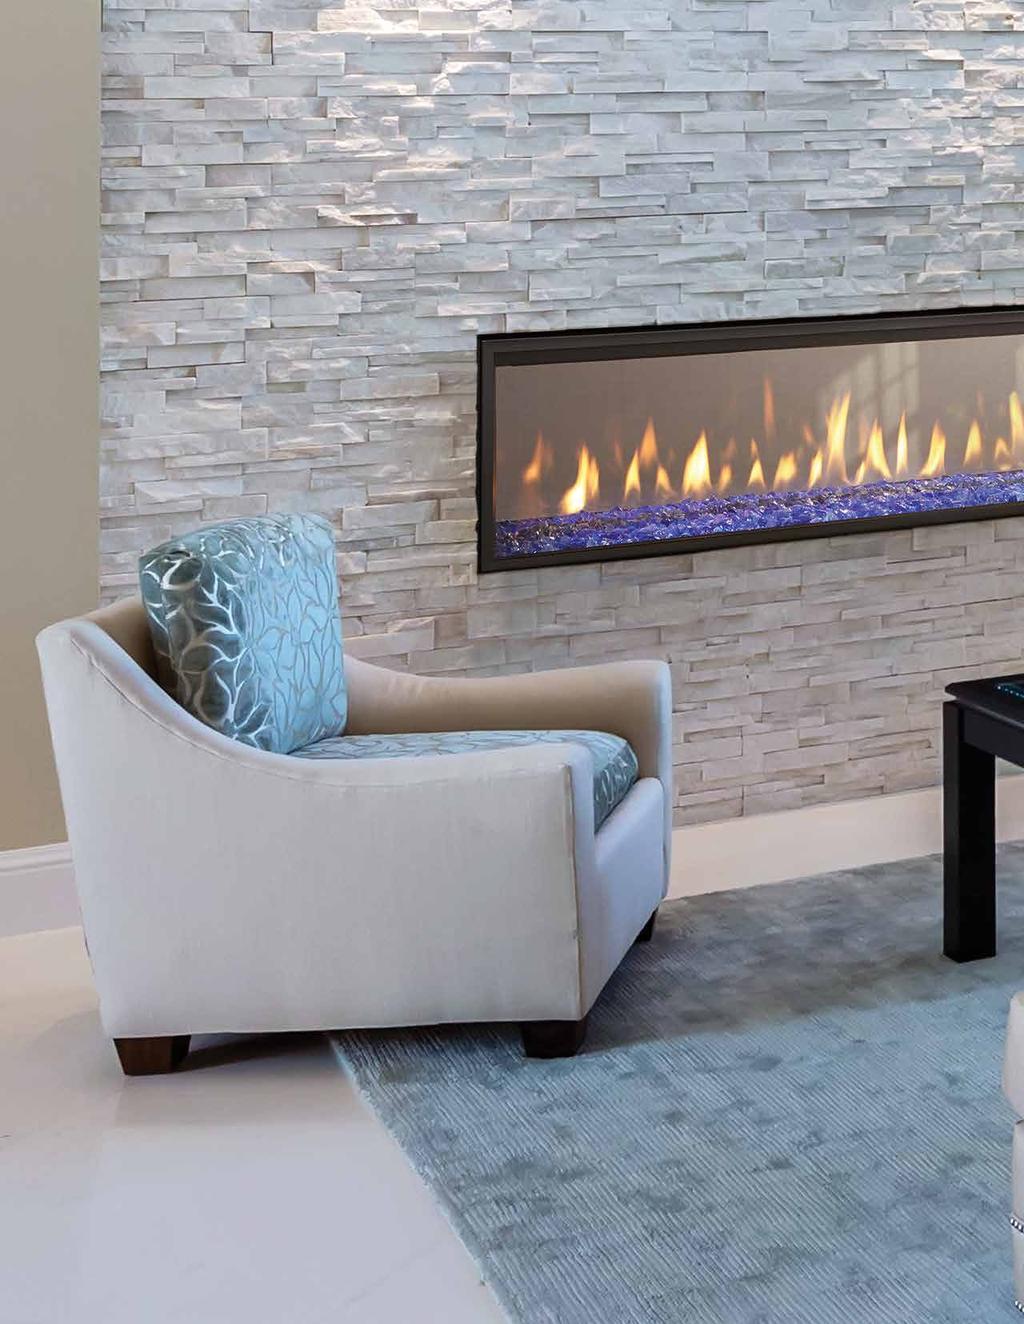 Crave Series direct vent gas fireplaces